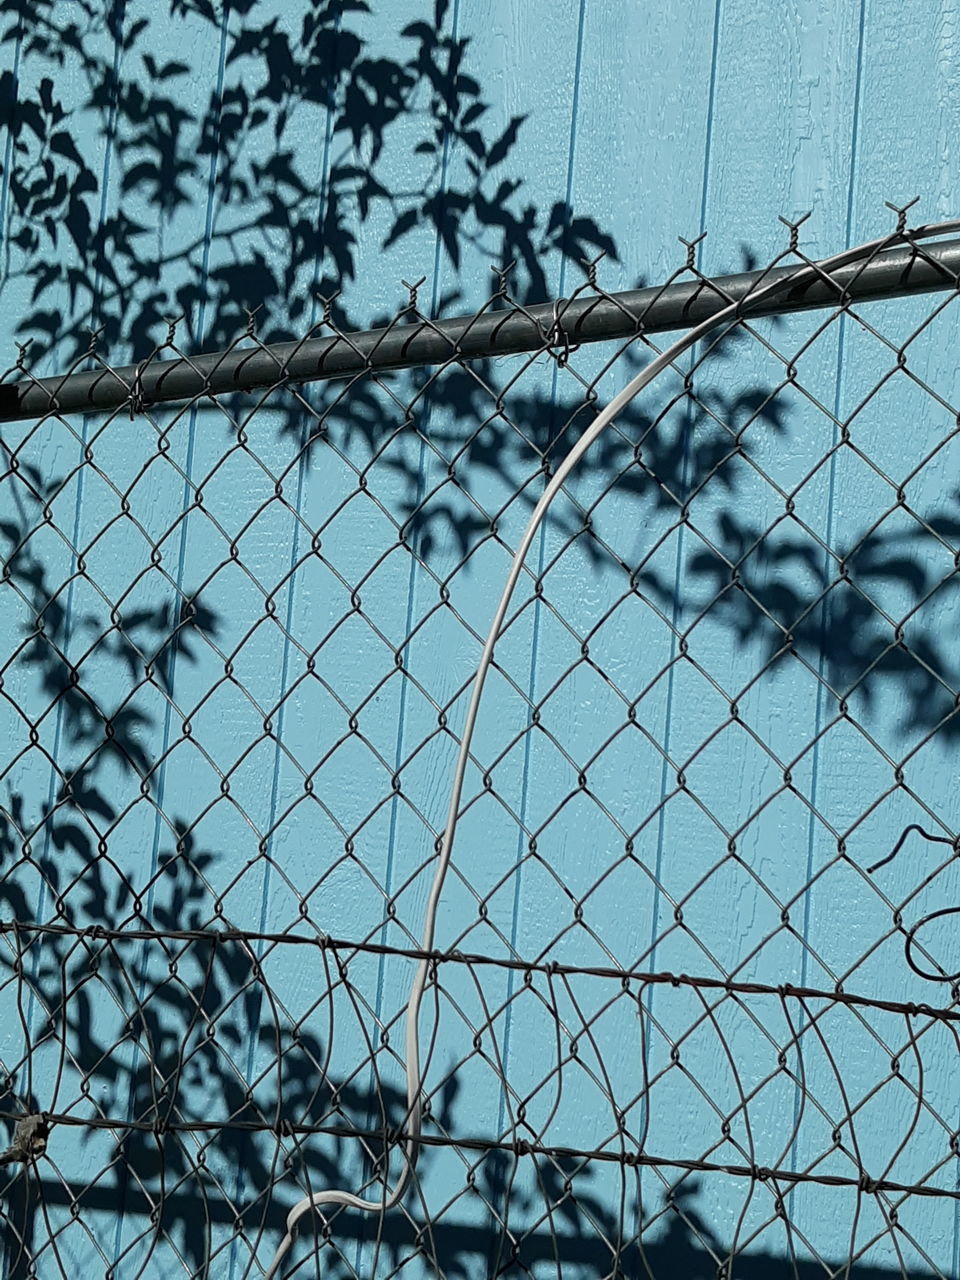 CLOSE-UP OF CHAINLINK FENCE AGAINST SKY SEEN THROUGH METAL